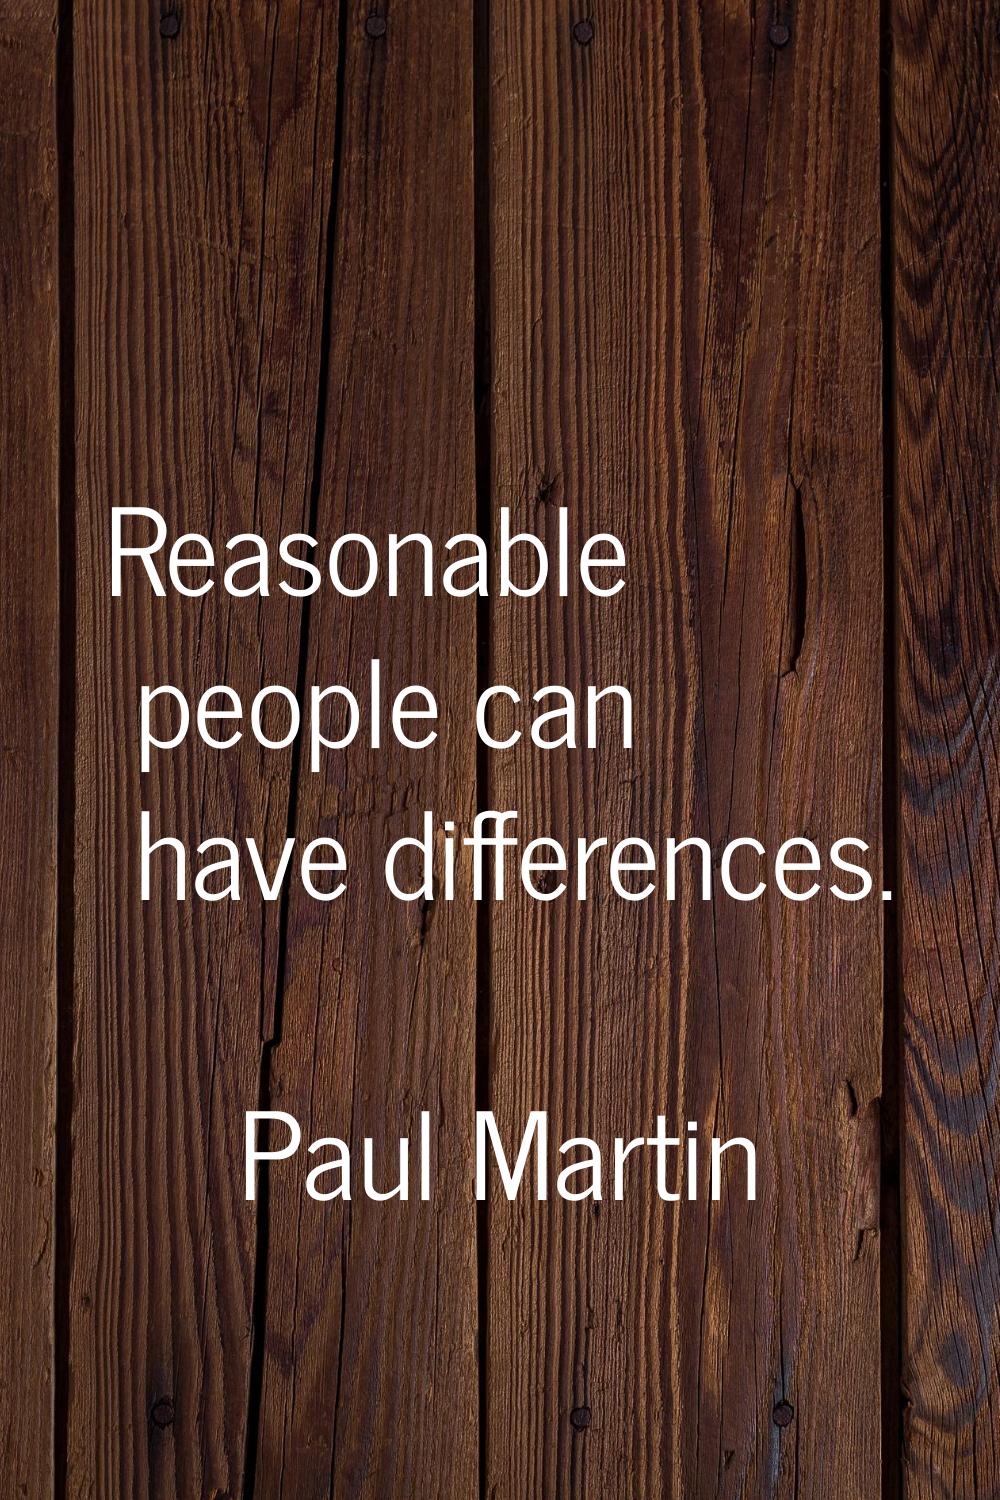 Reasonable people can have differences.